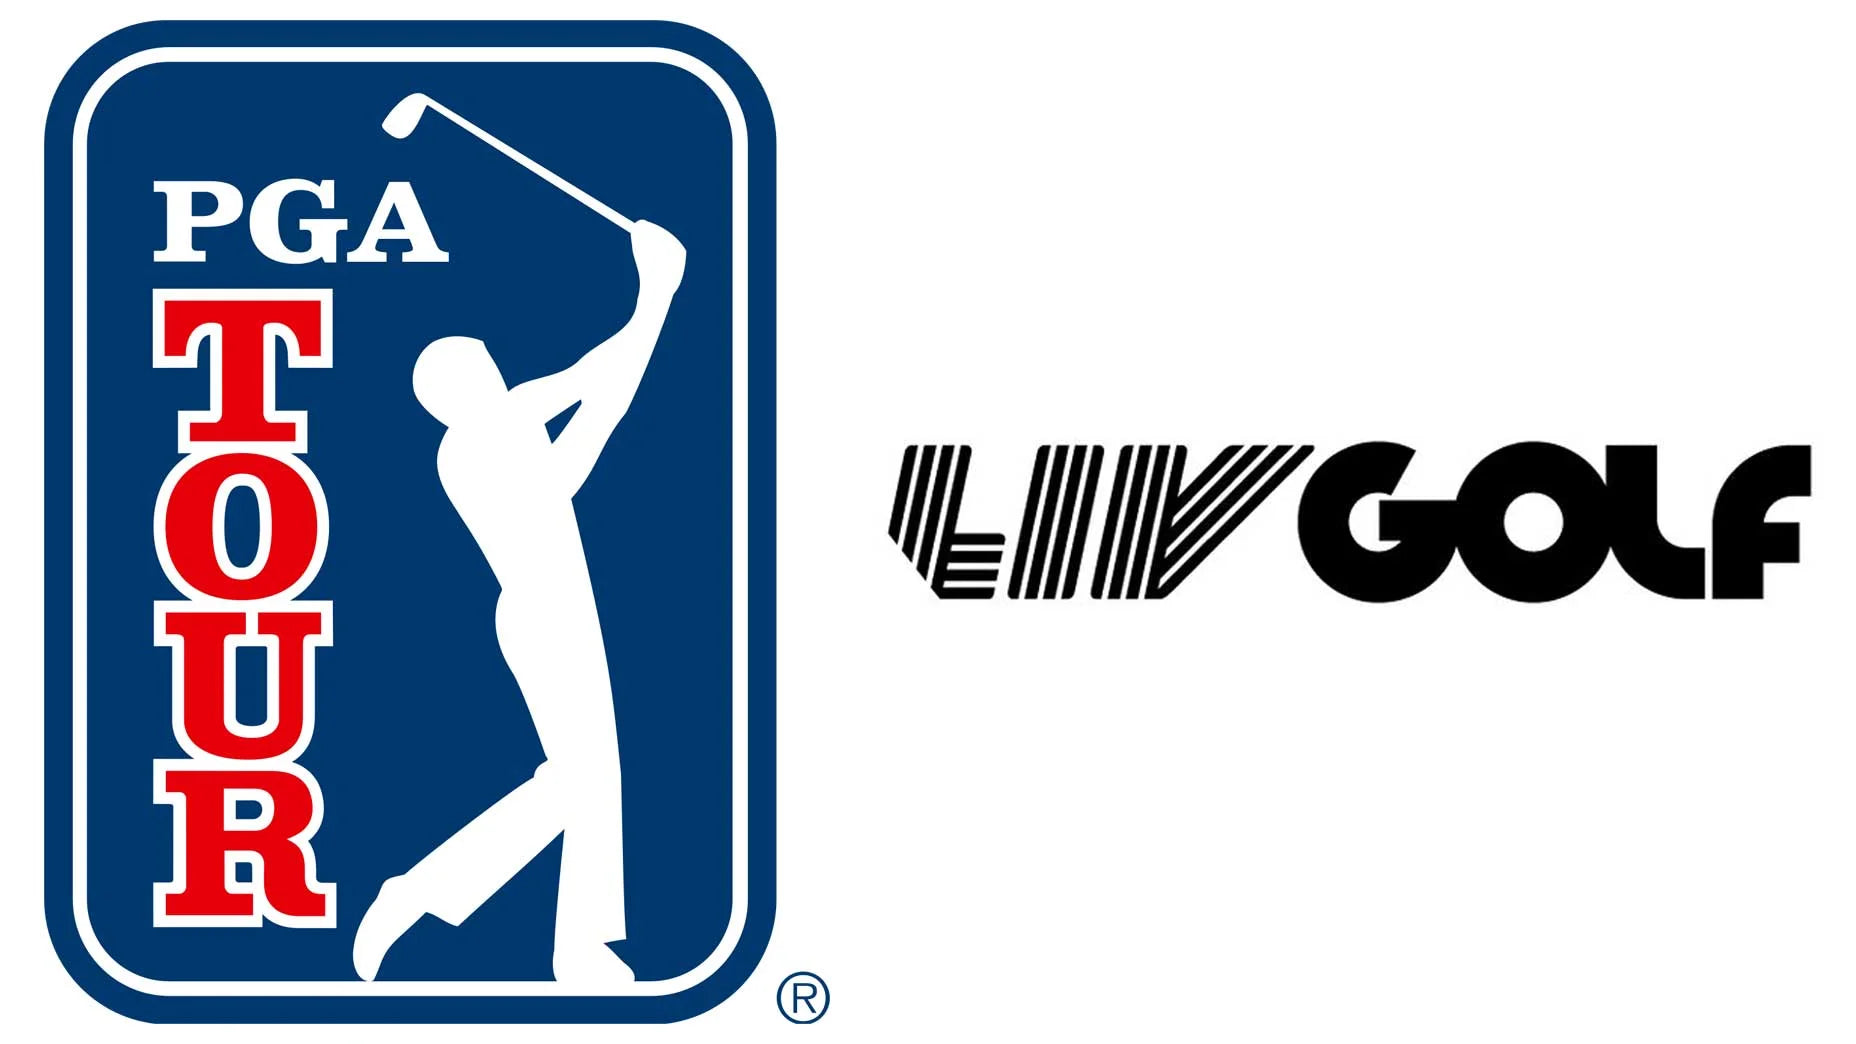 Exploring the Potential Impact of the LIV Golf and PGA Merger on Sustainability and Inclusiveness in Golf